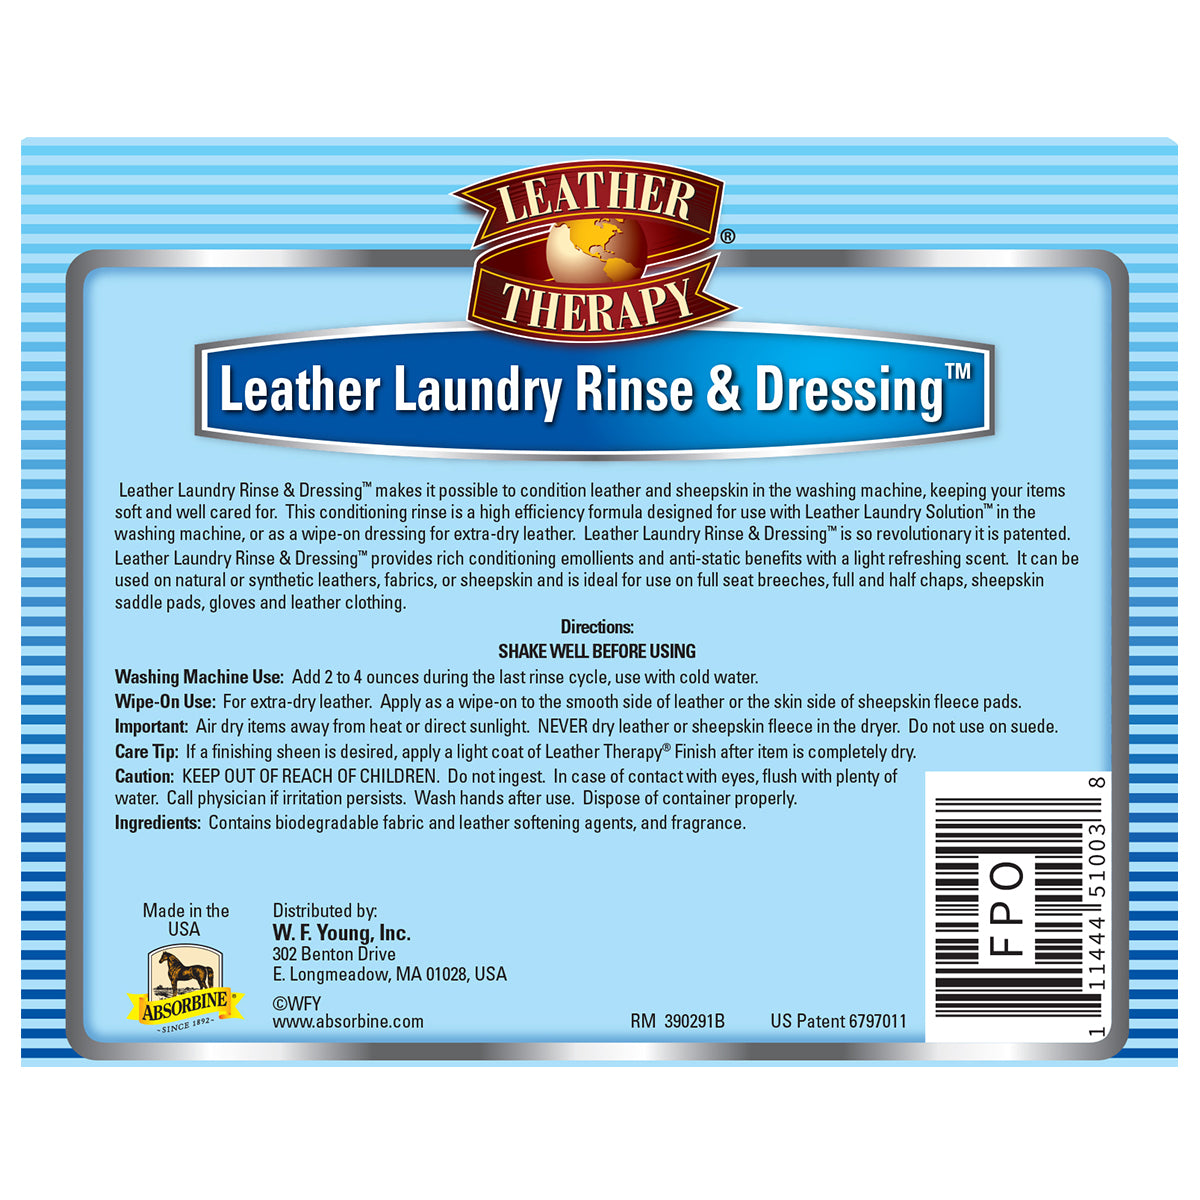 Leather Therapy Leather Laundry Rinse & Dressing. Conditioning Rinse and Wipe-On dressing. Conditions, refreshes, anti-static, biodegradable back label.